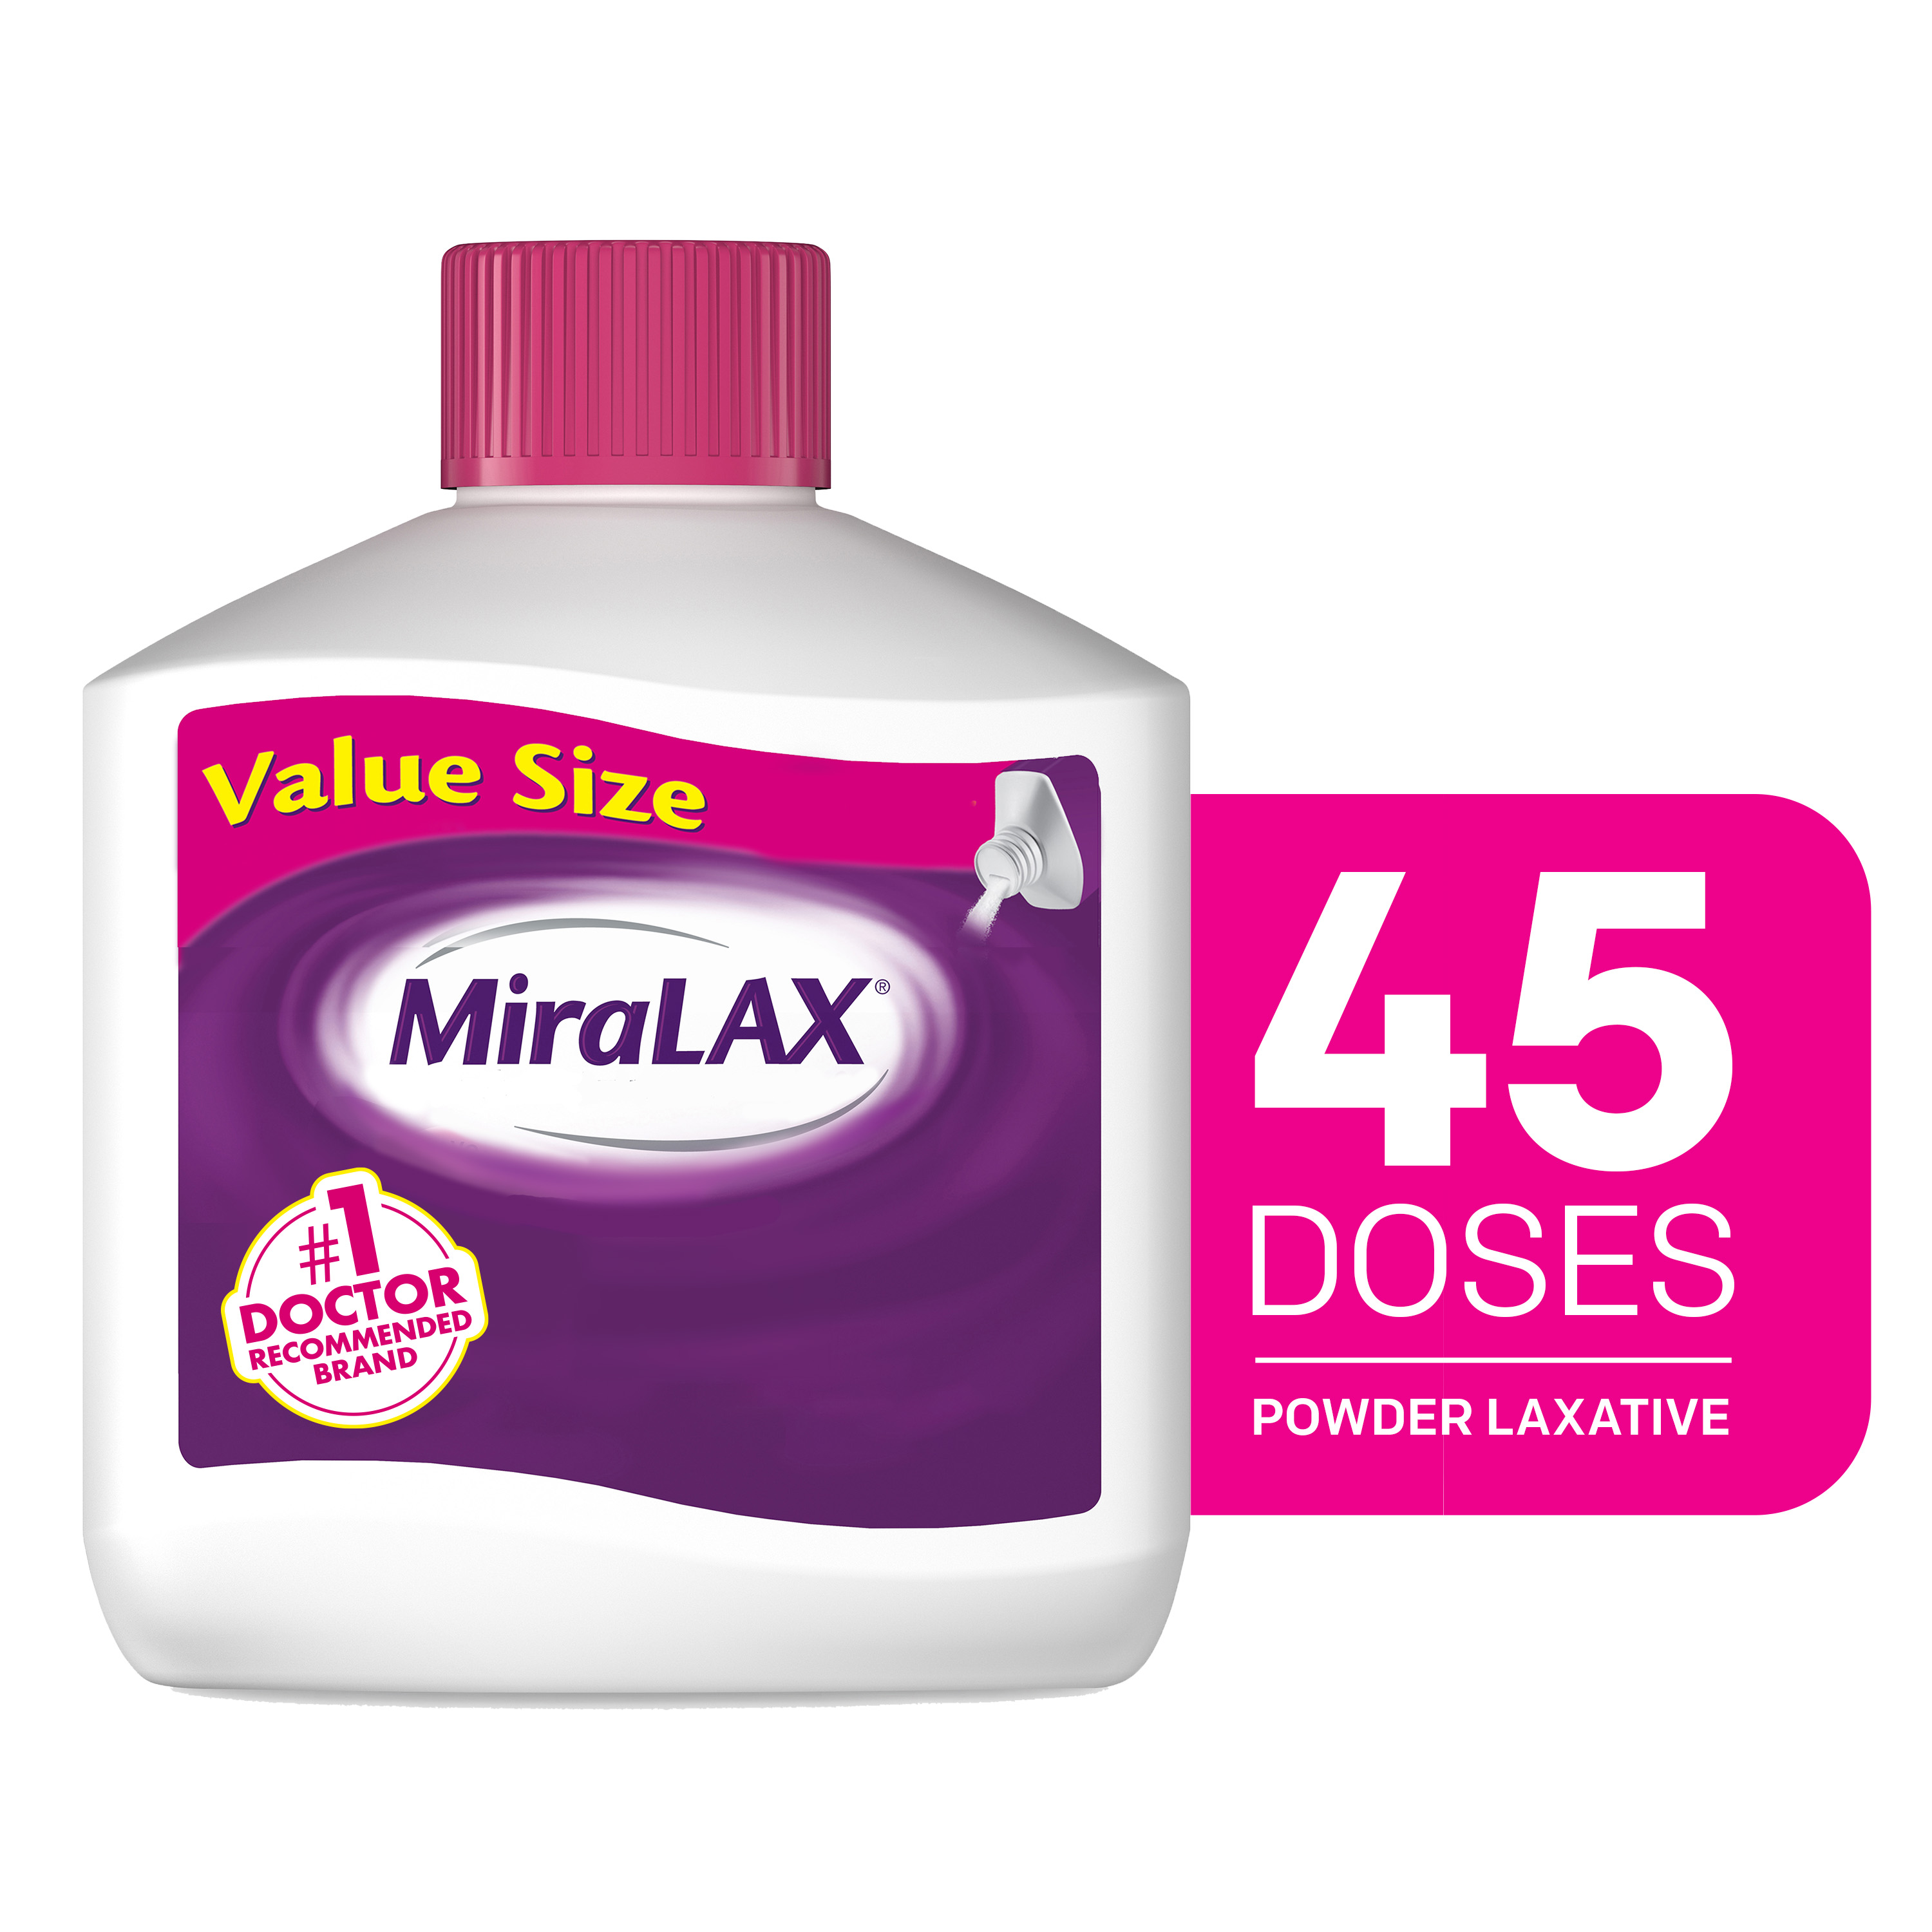 MiraLAX Laxative Powder for Gentle Constipation Relief, Stool Softener, 45 Doses - image 1 of 7